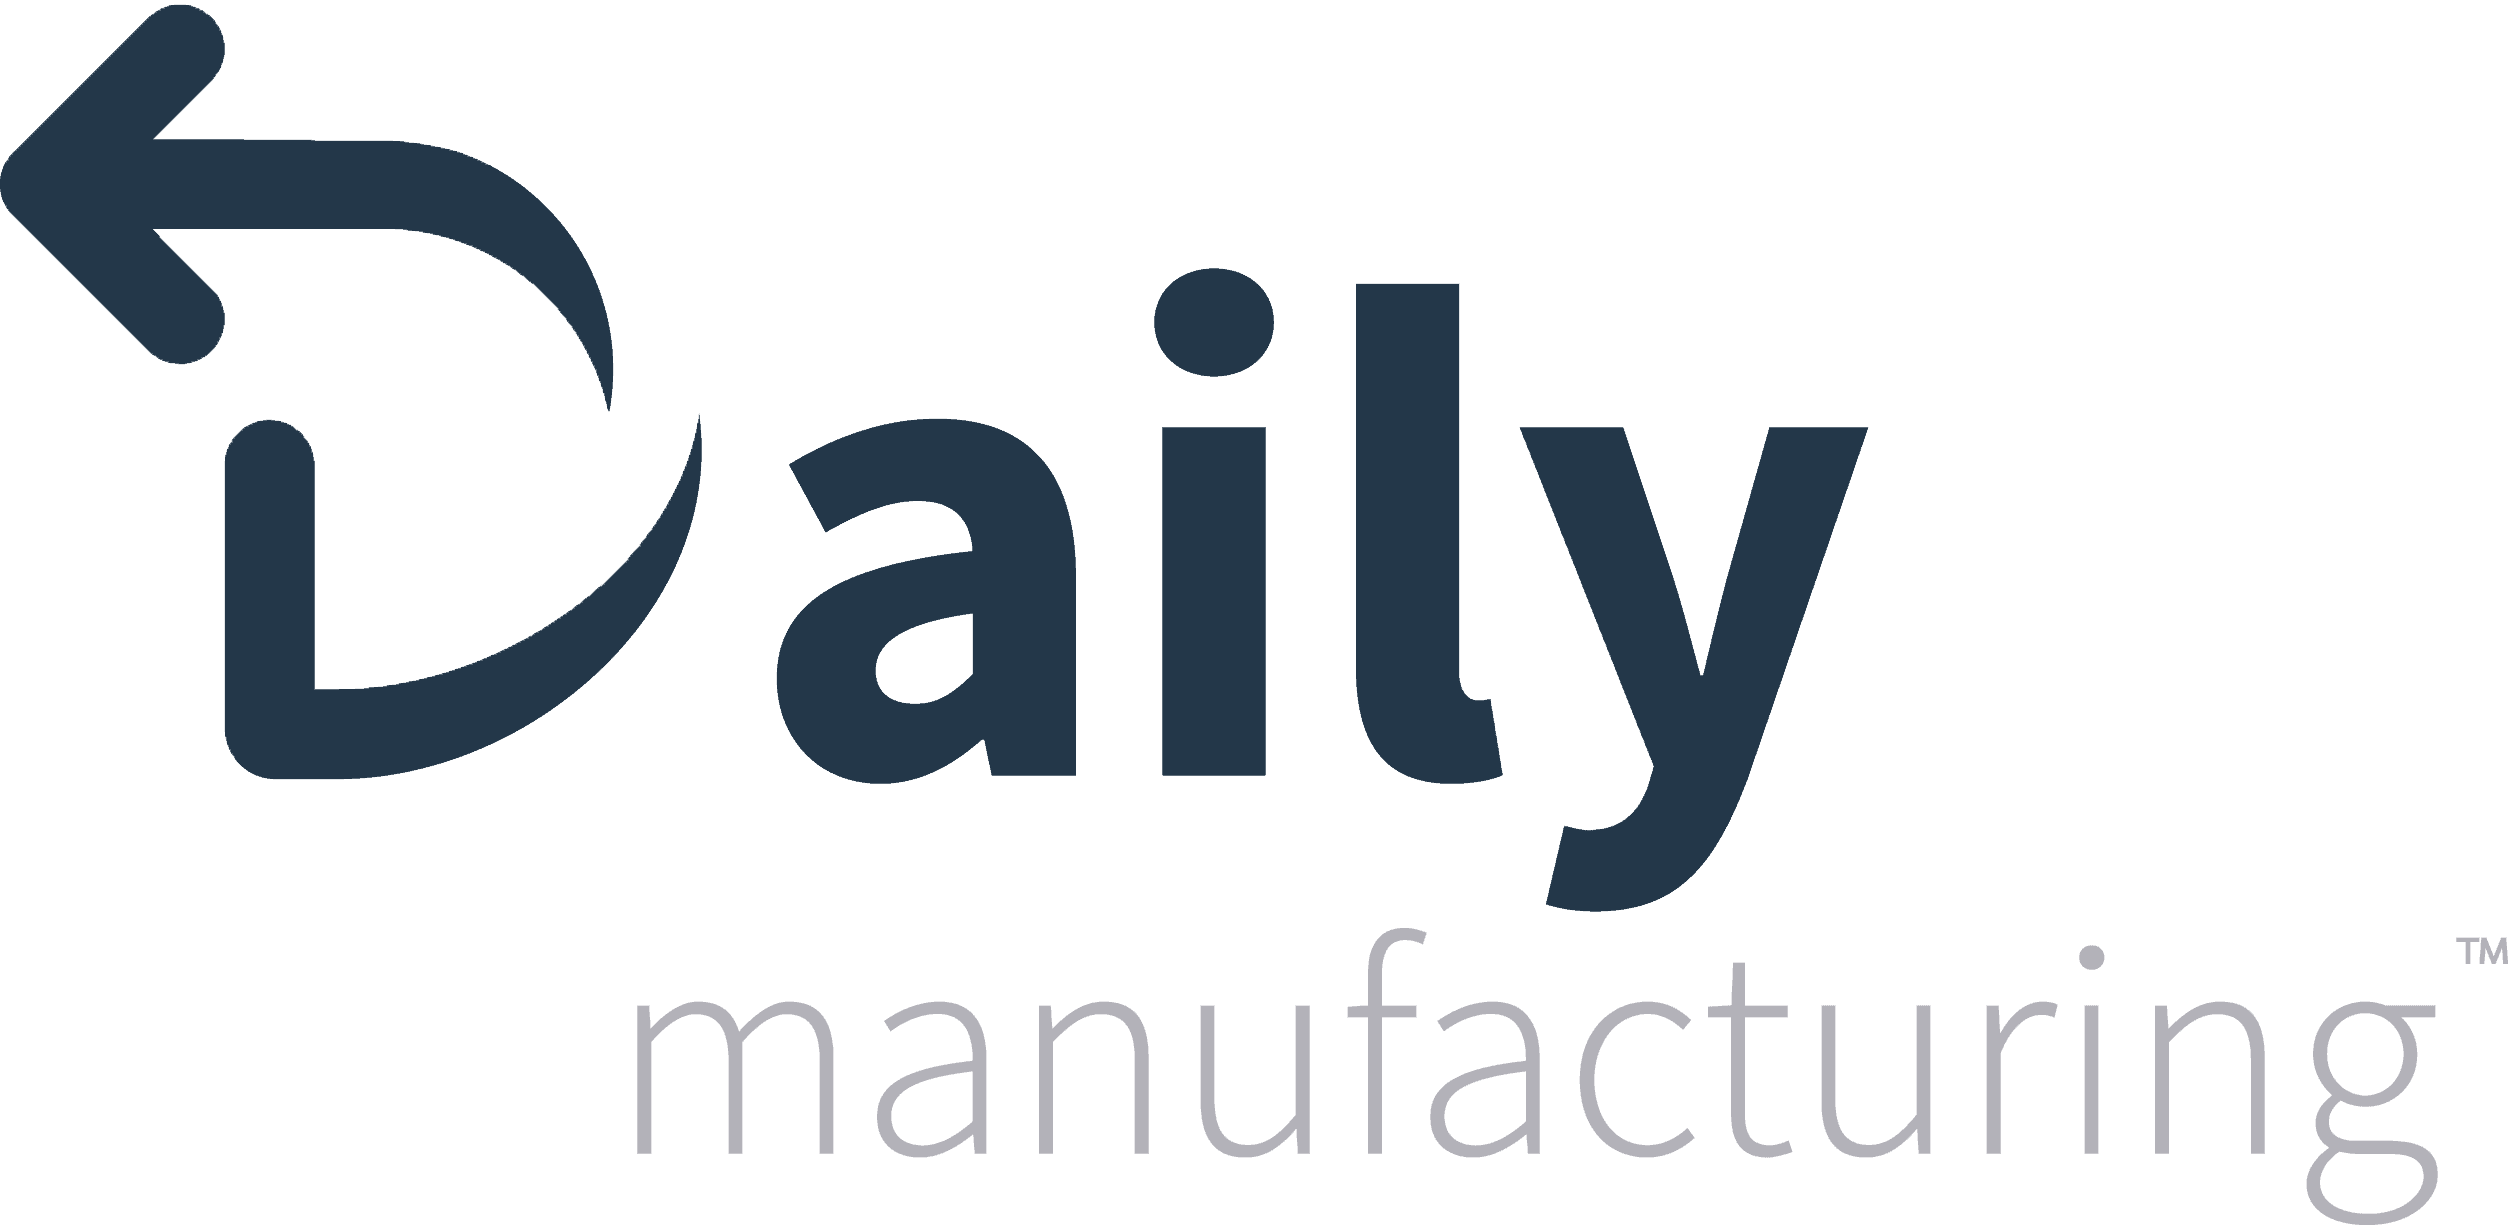 Daily Manufacturing